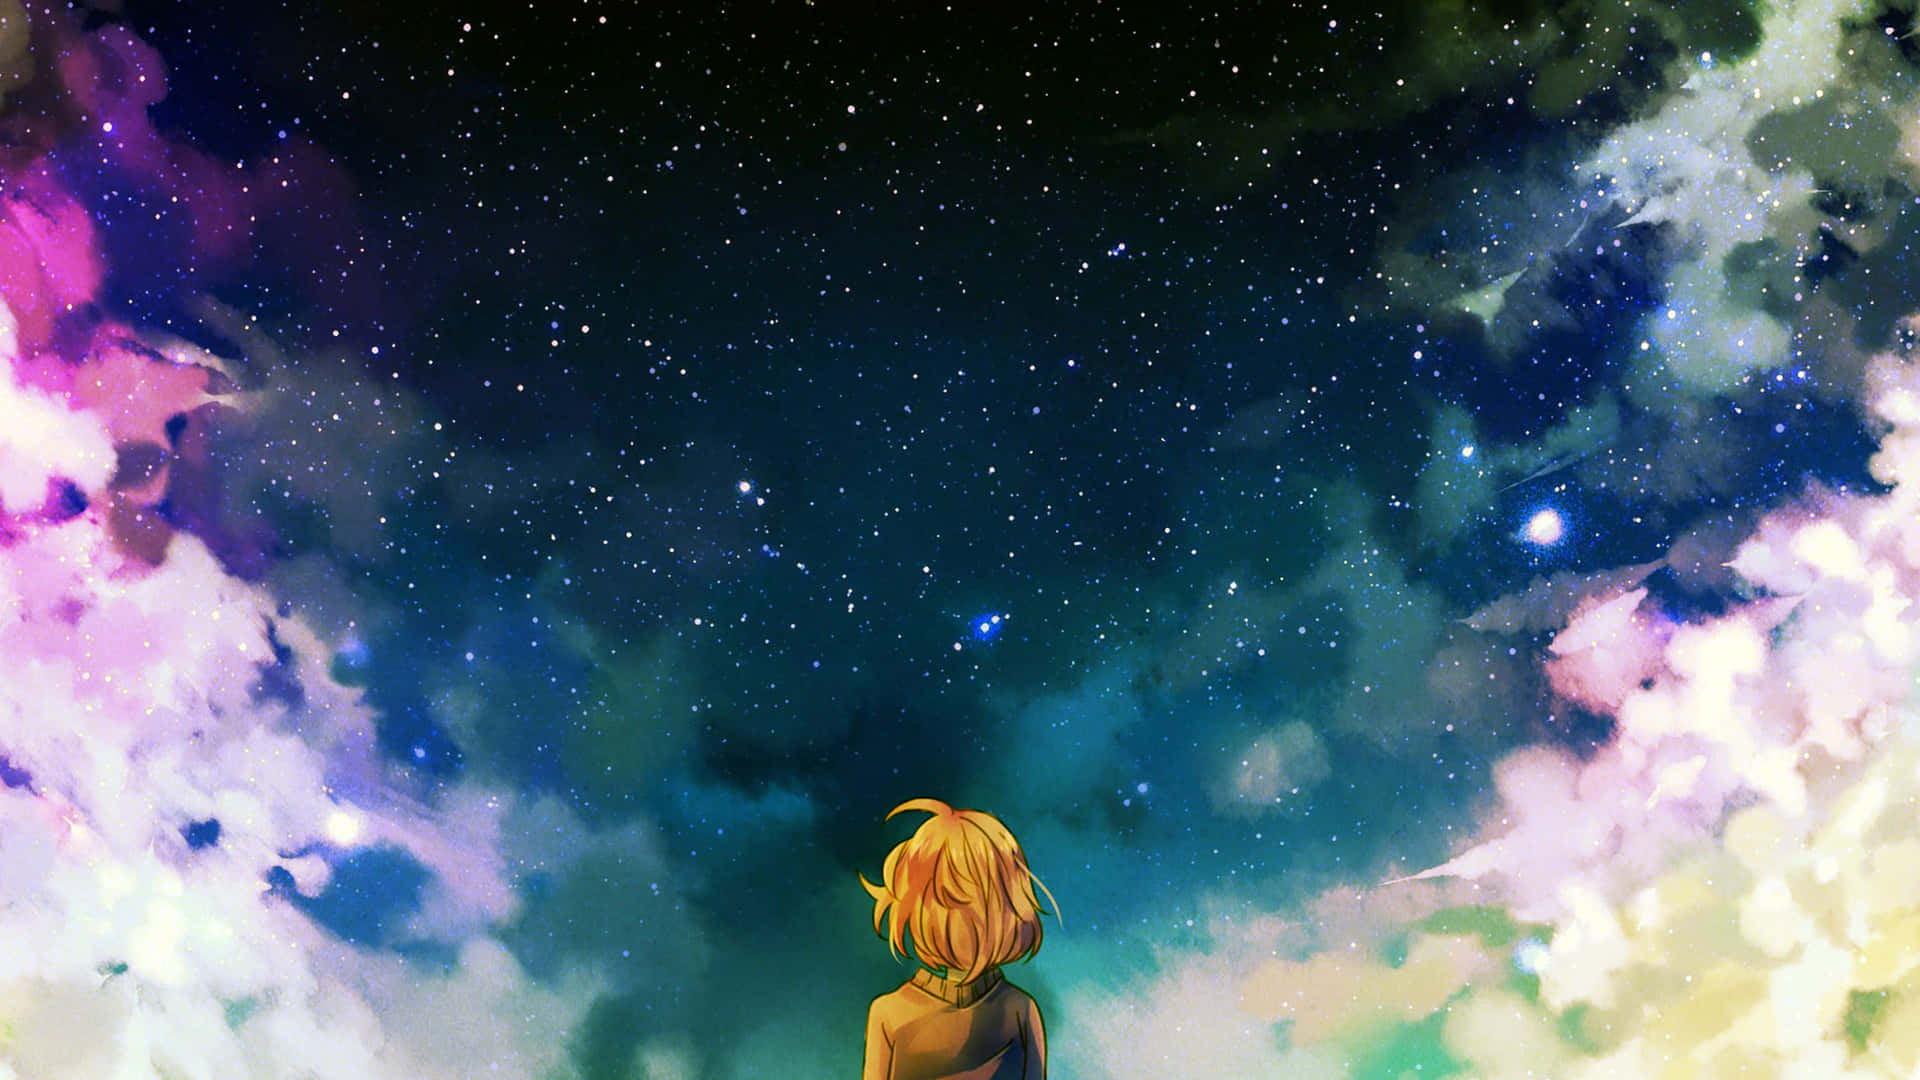 Sadness And Melancholy Fill The Heartbreaking Atmosphere In This Sic Anime Landscape Background